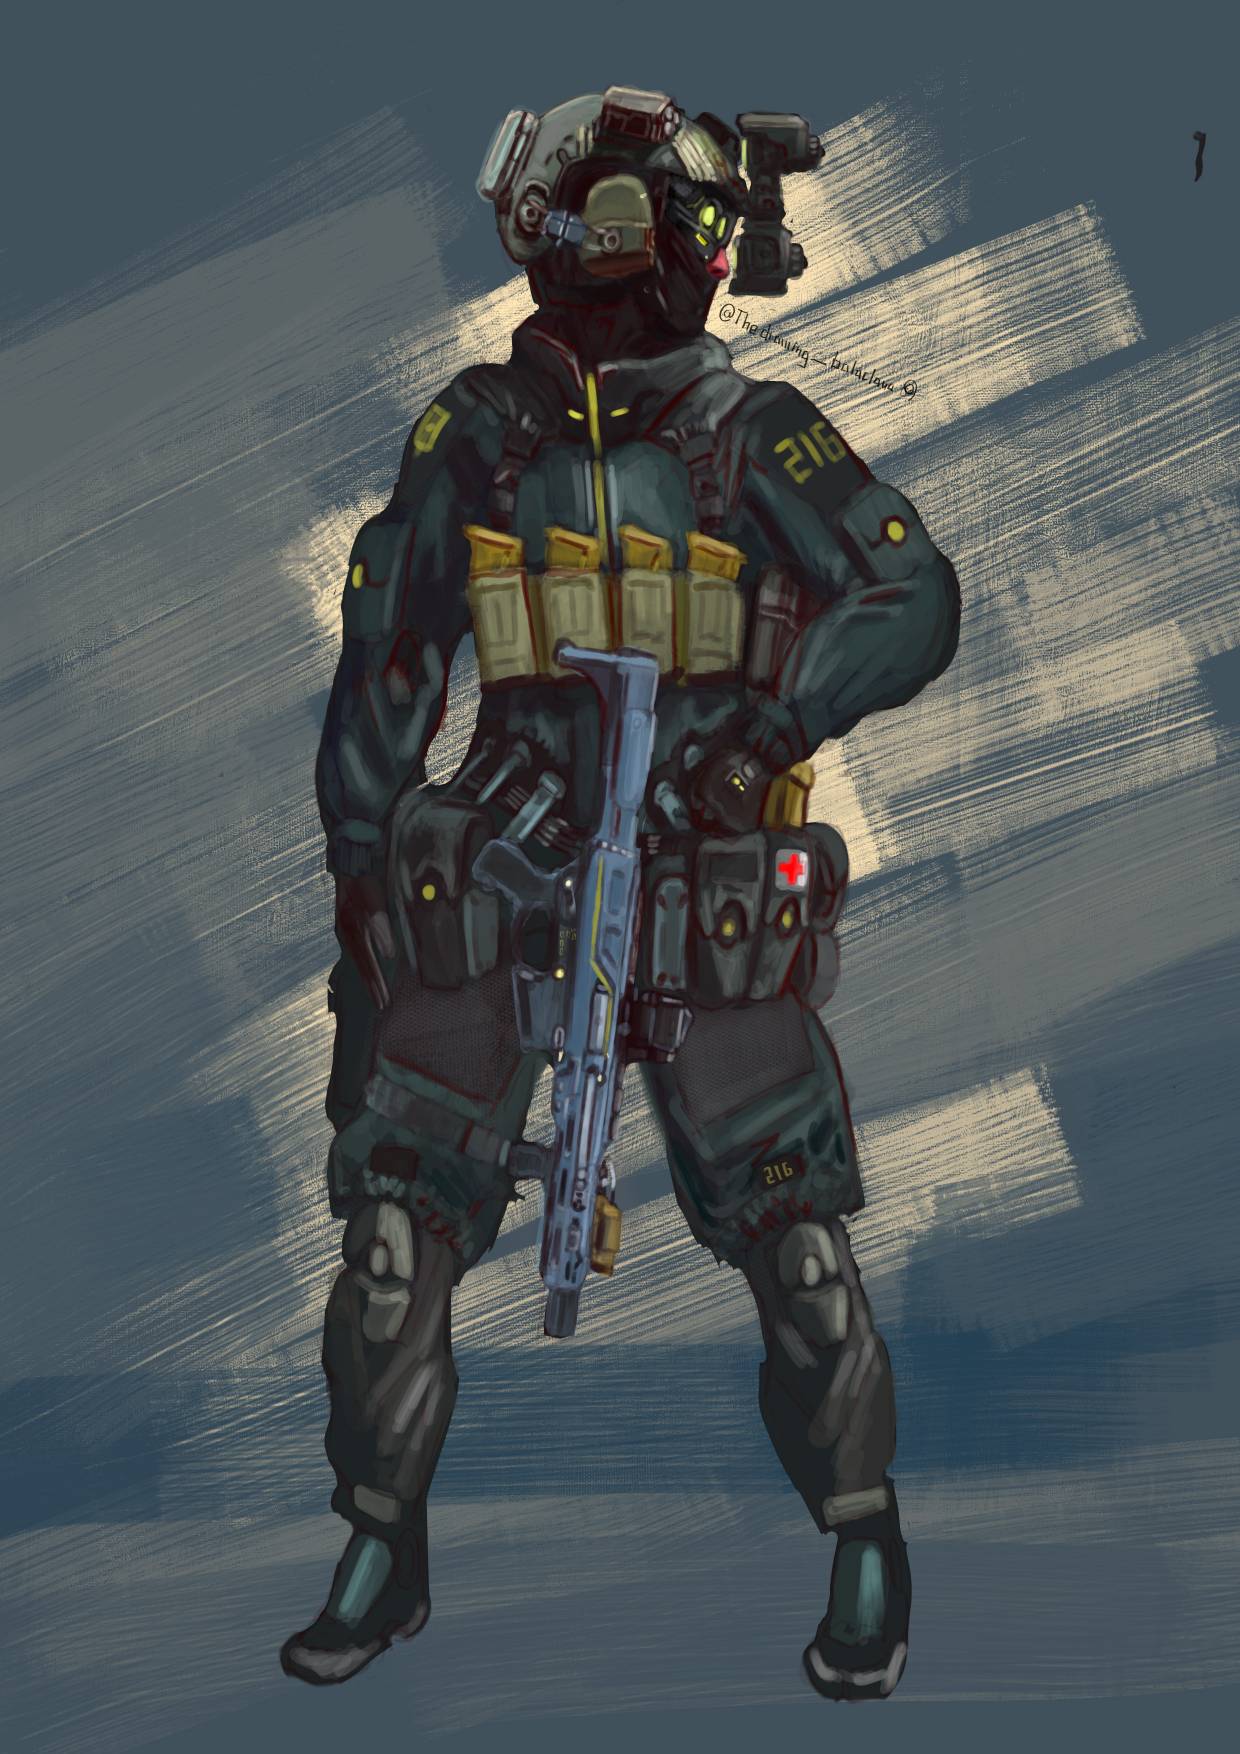 Sci fi spec ops by thedrawingbalaclava on DeviantArt